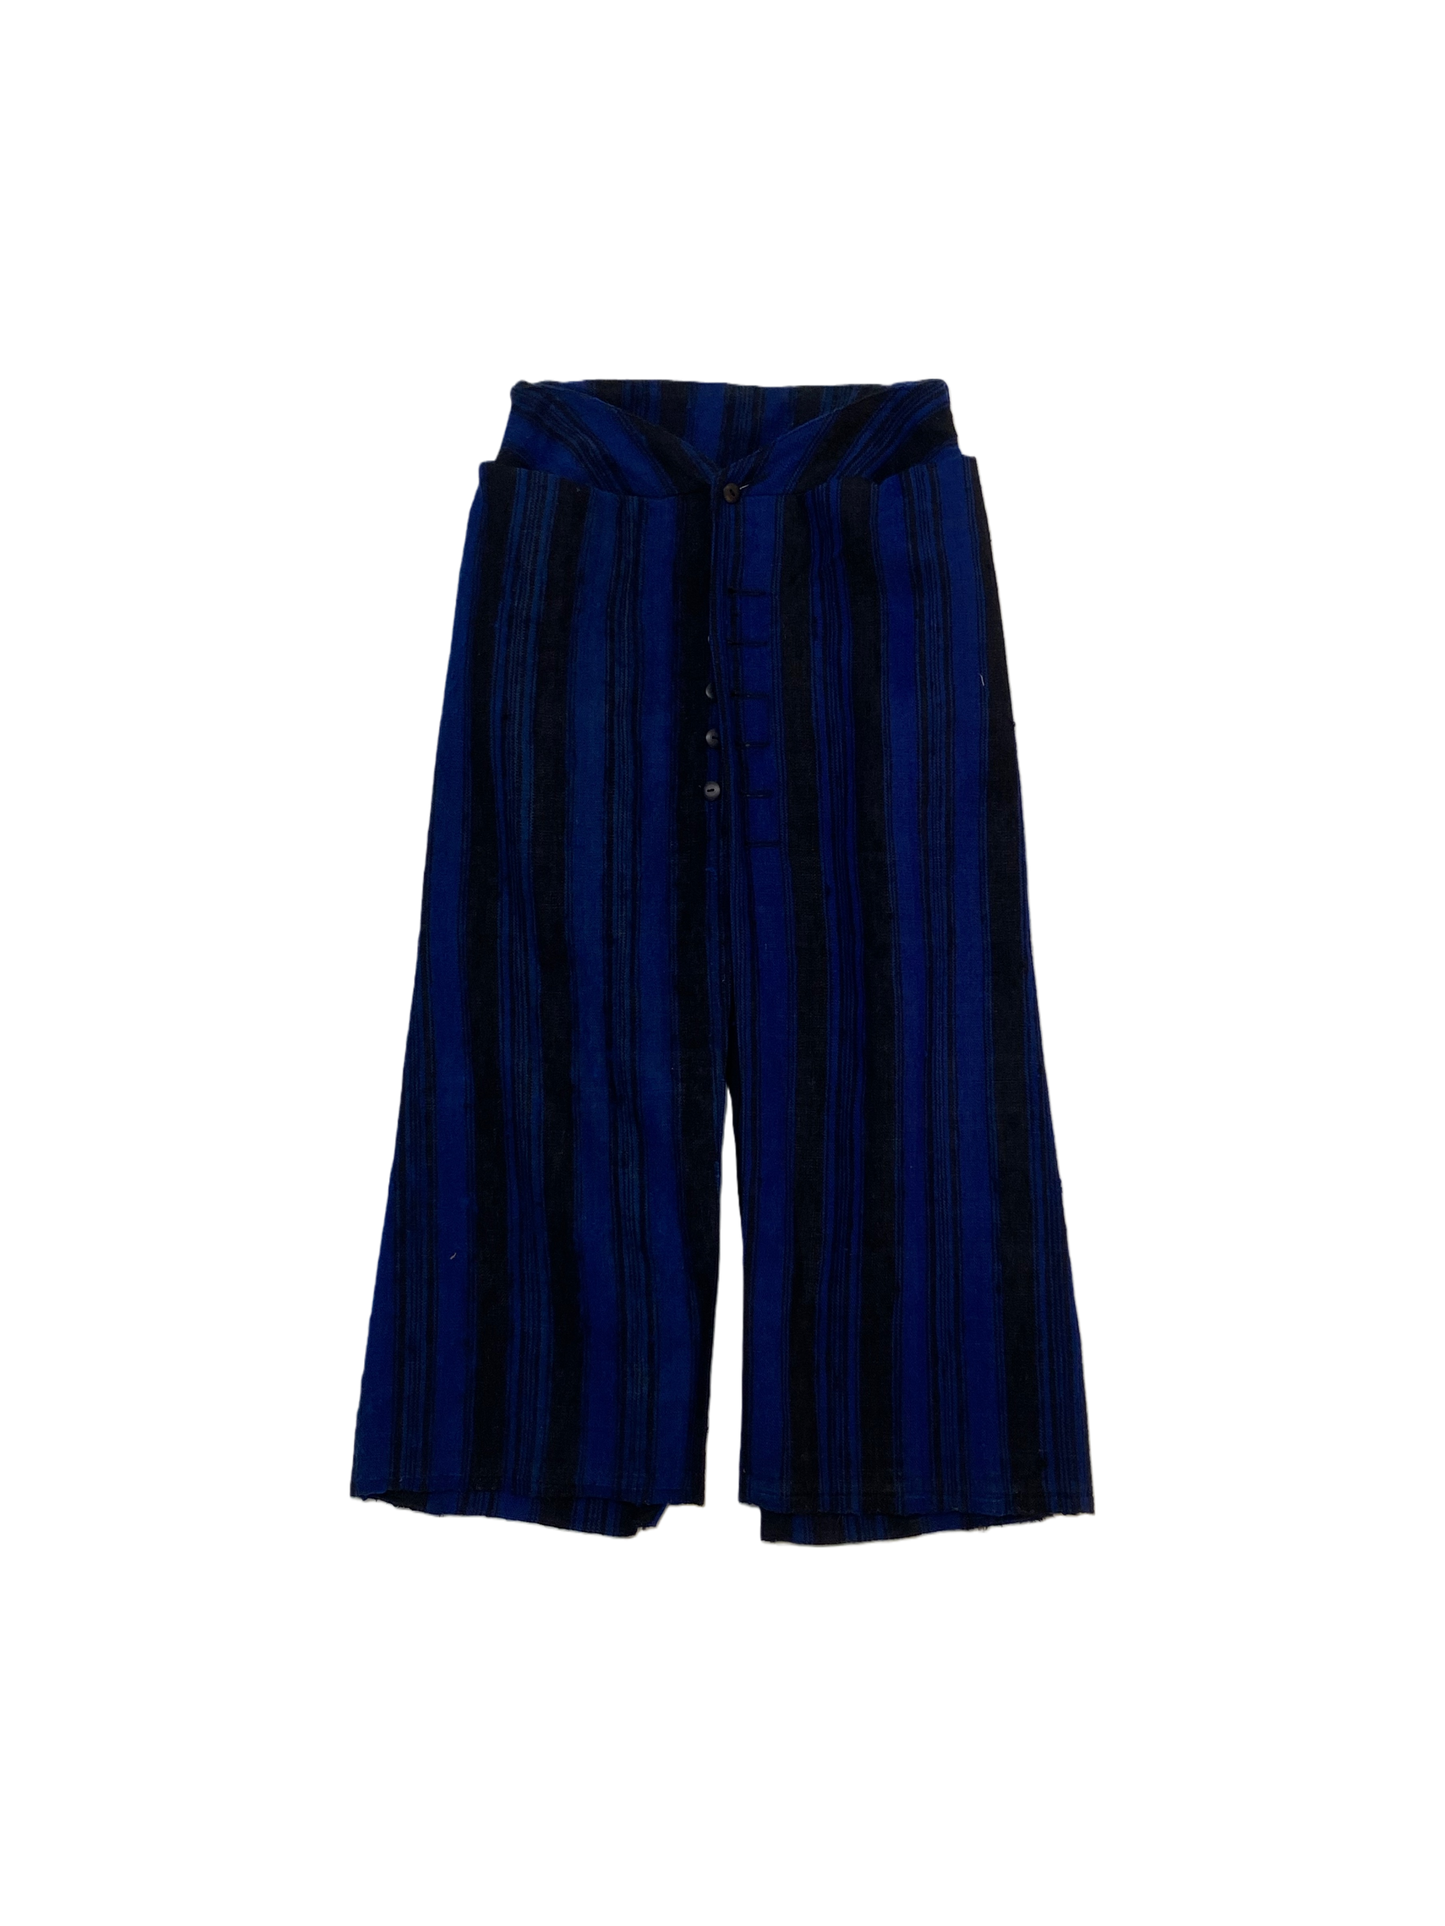 Coat Skirt in Navy and Black Striped Antique Dutch Wool Linen (Each Striped Fabric is Irregular)